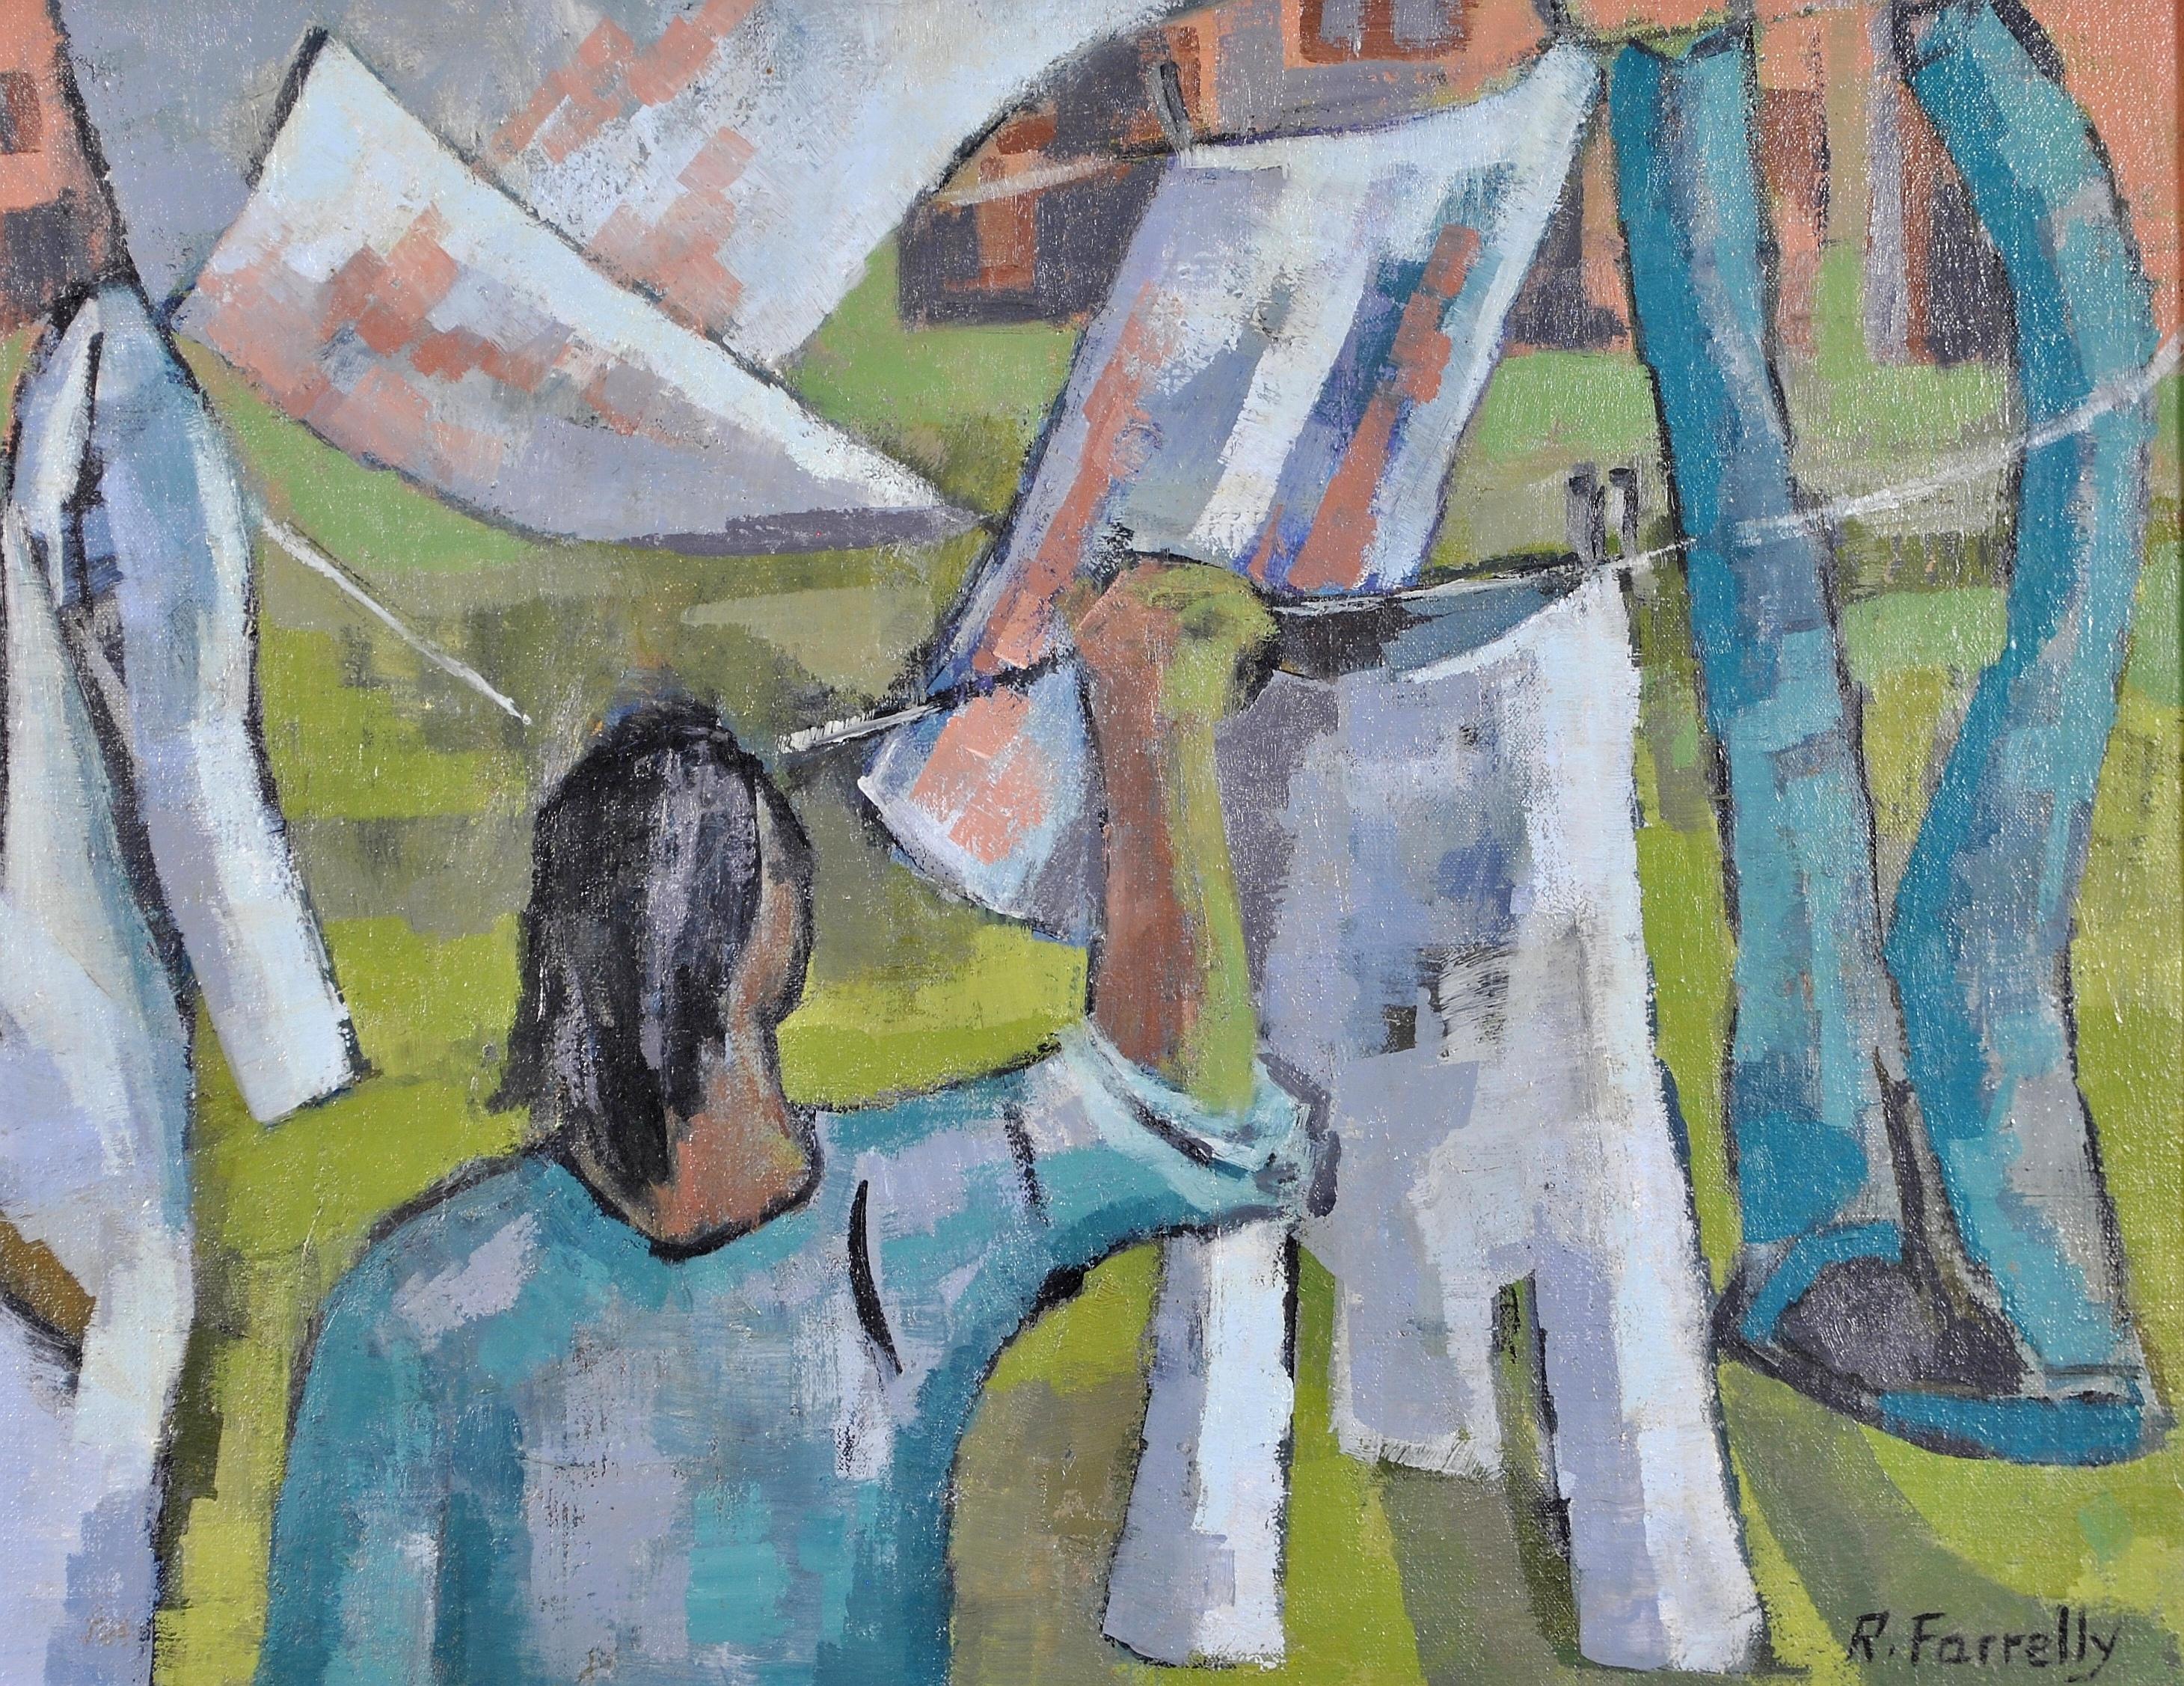 A beautiful Modern British oil on canvas by Ruth Farrelly which depicts a lady putting her washing out on a line in her garden. Superb quality and striking painting, presented in the original frame.

Artist: Ruth Farrelly (British, 1918-2018)
Title: